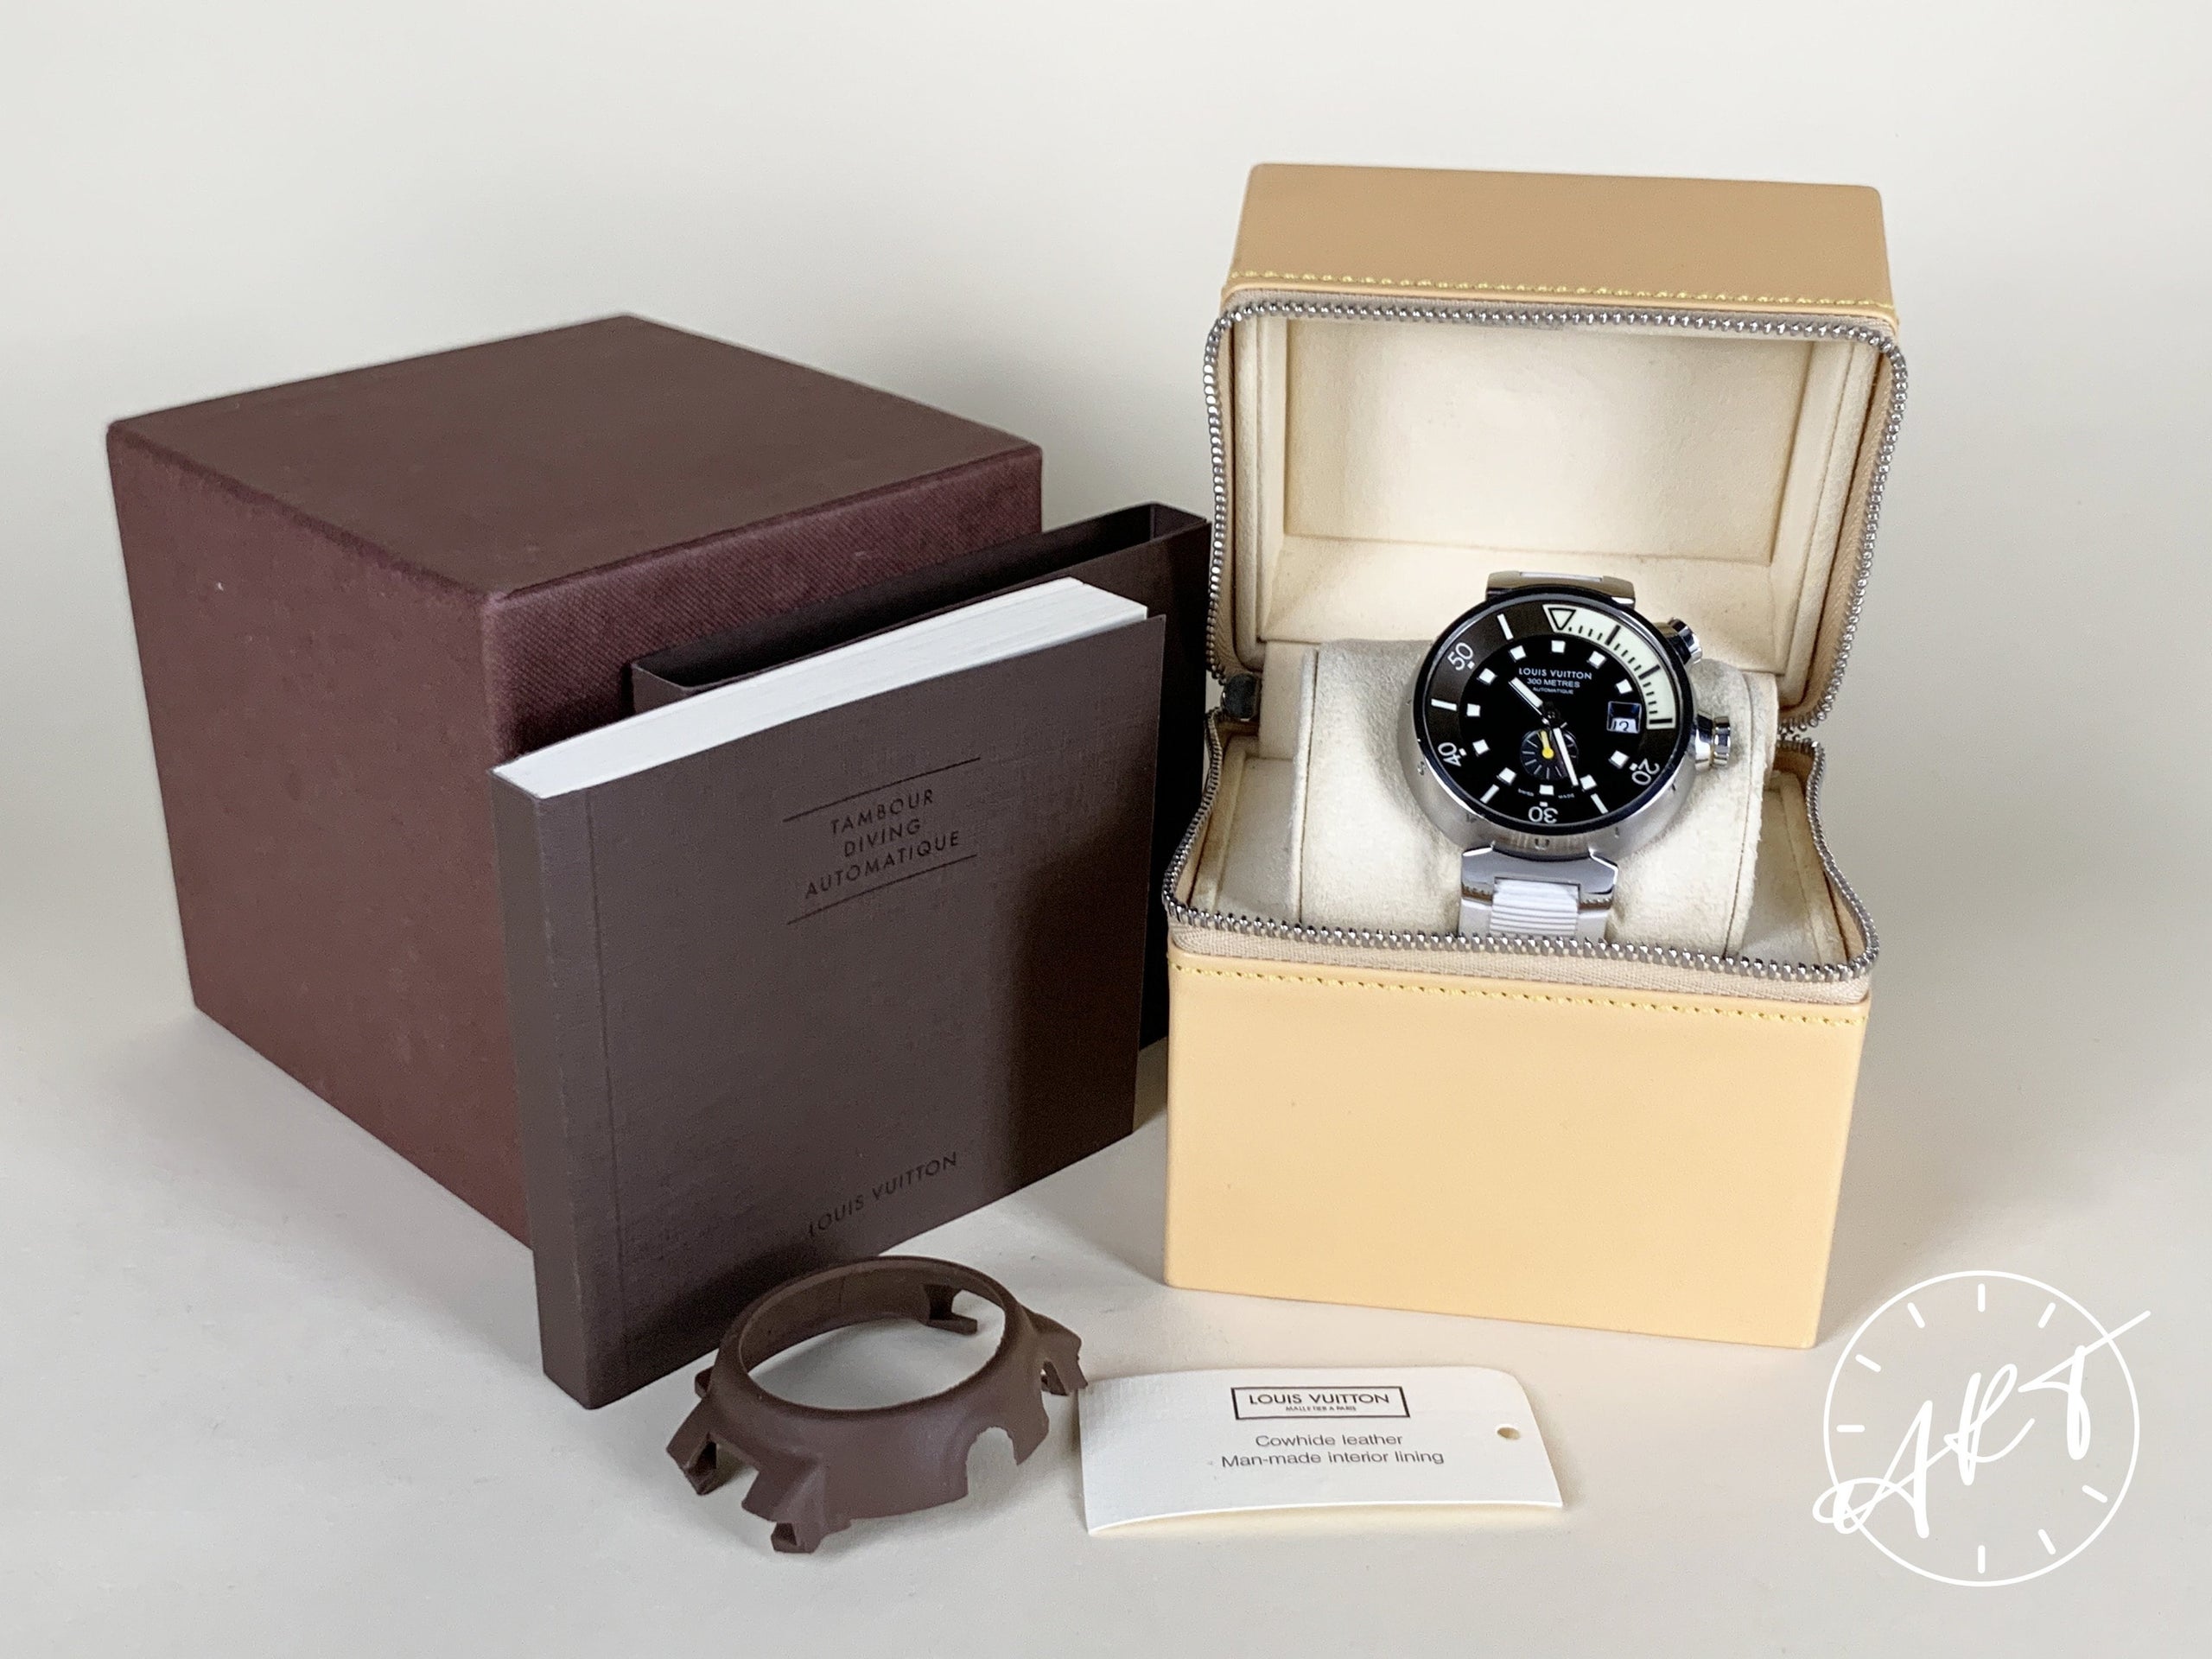 Louis Vuitton Tambour Diving Stainless Steel Watch Q1031 w/ Box